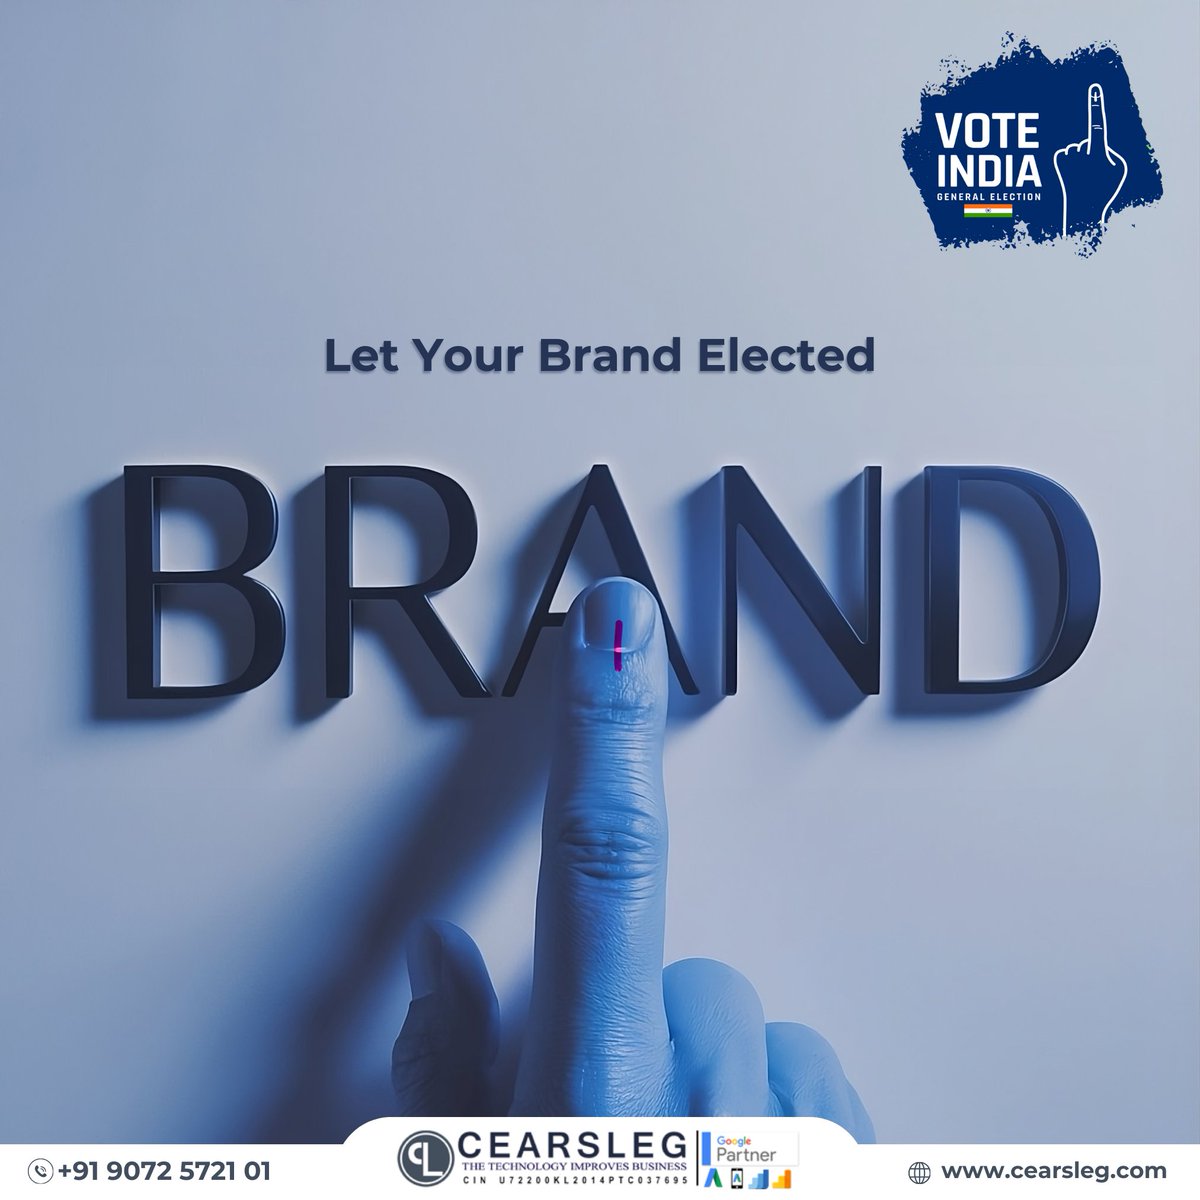 Dominate the digital arena with our winning digital marketing campaigns. Every click is a vote, and we'll make sure your brand gets elected by your target audience.
#brandingagency #brandingstrategy #digitalmarketingexpert  #branding #cearsleg  #voteindia